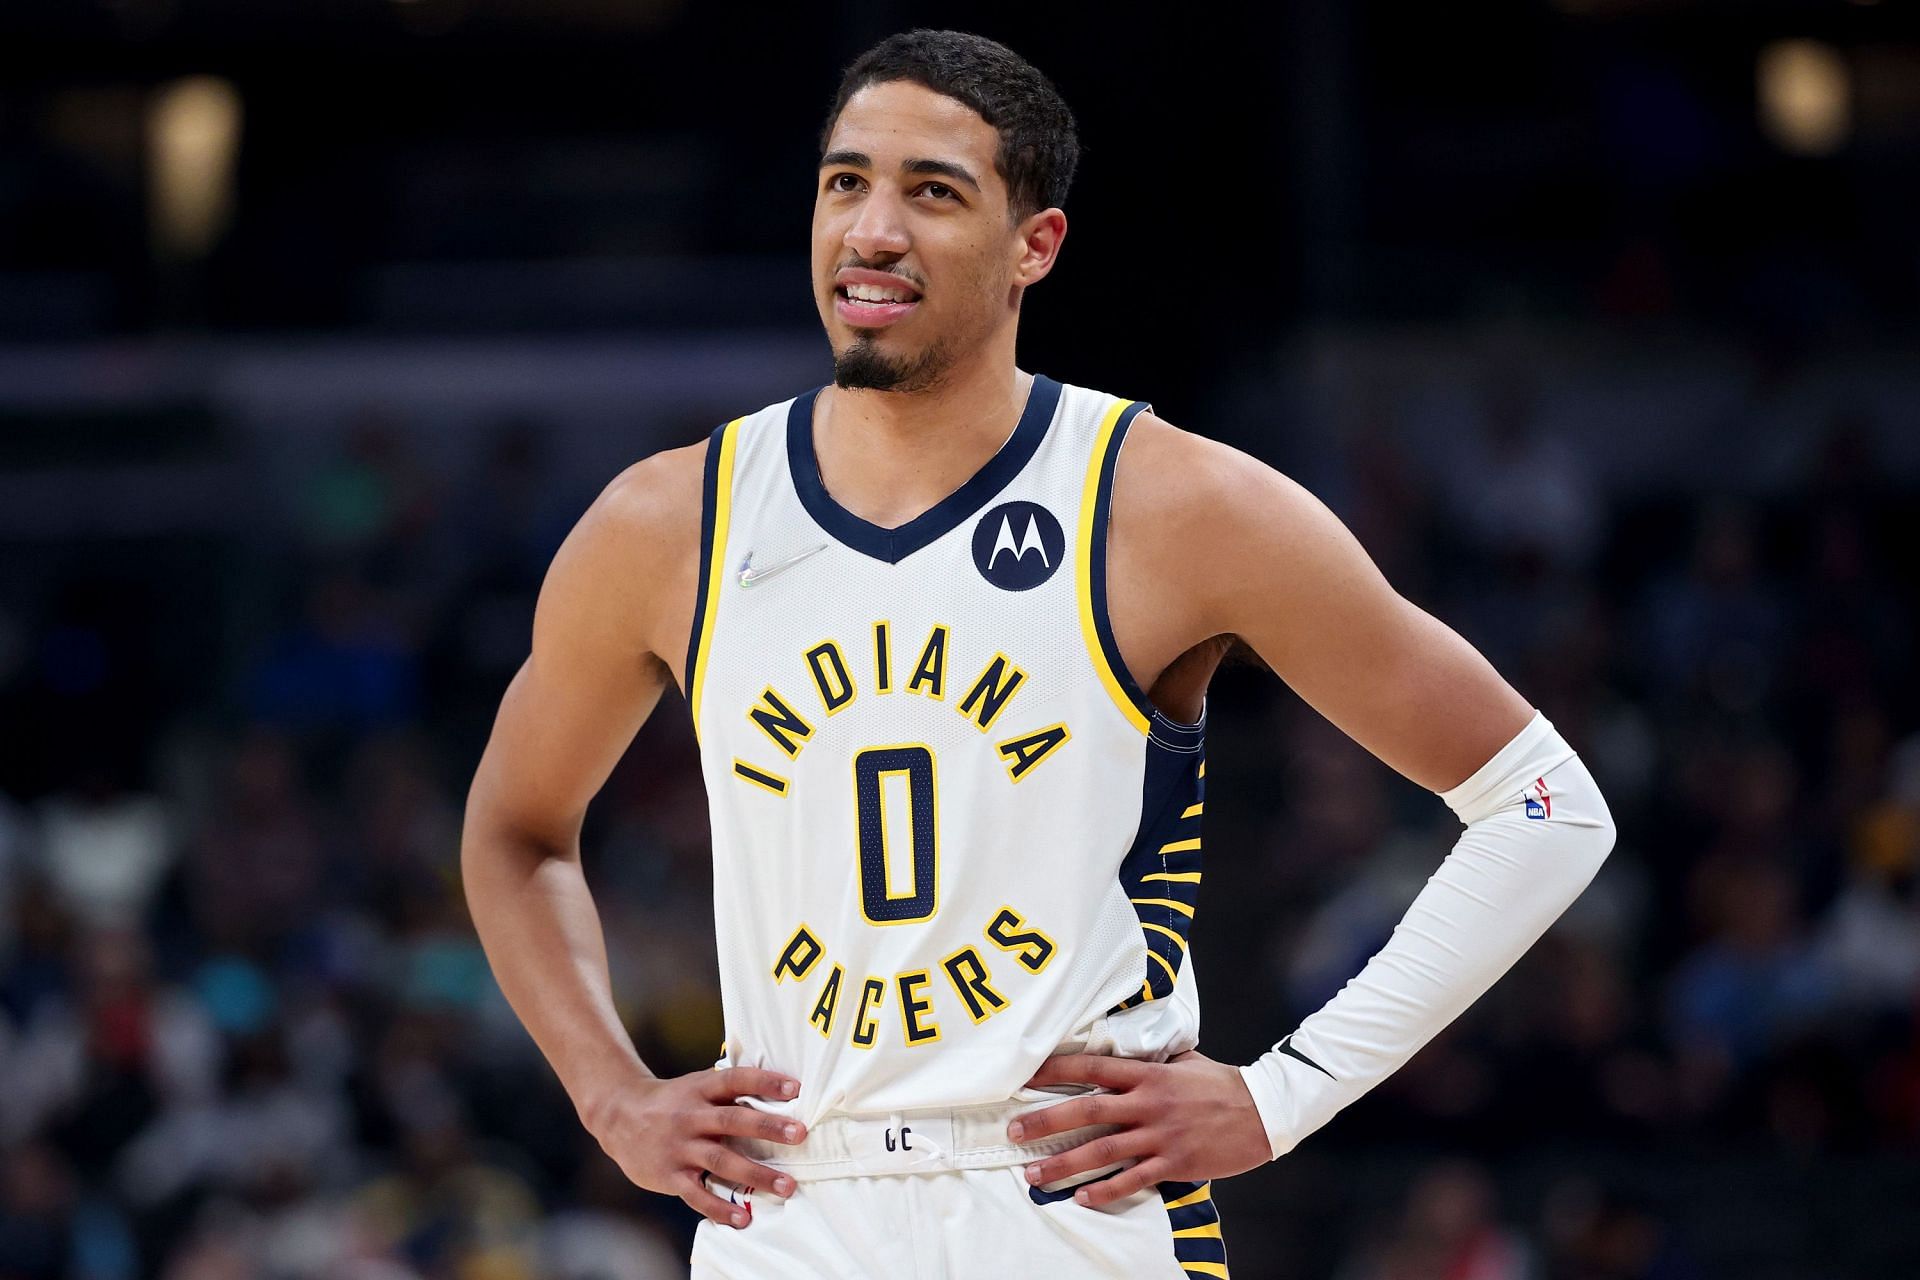 Tyrese Haliburton of the Indiana Pacers